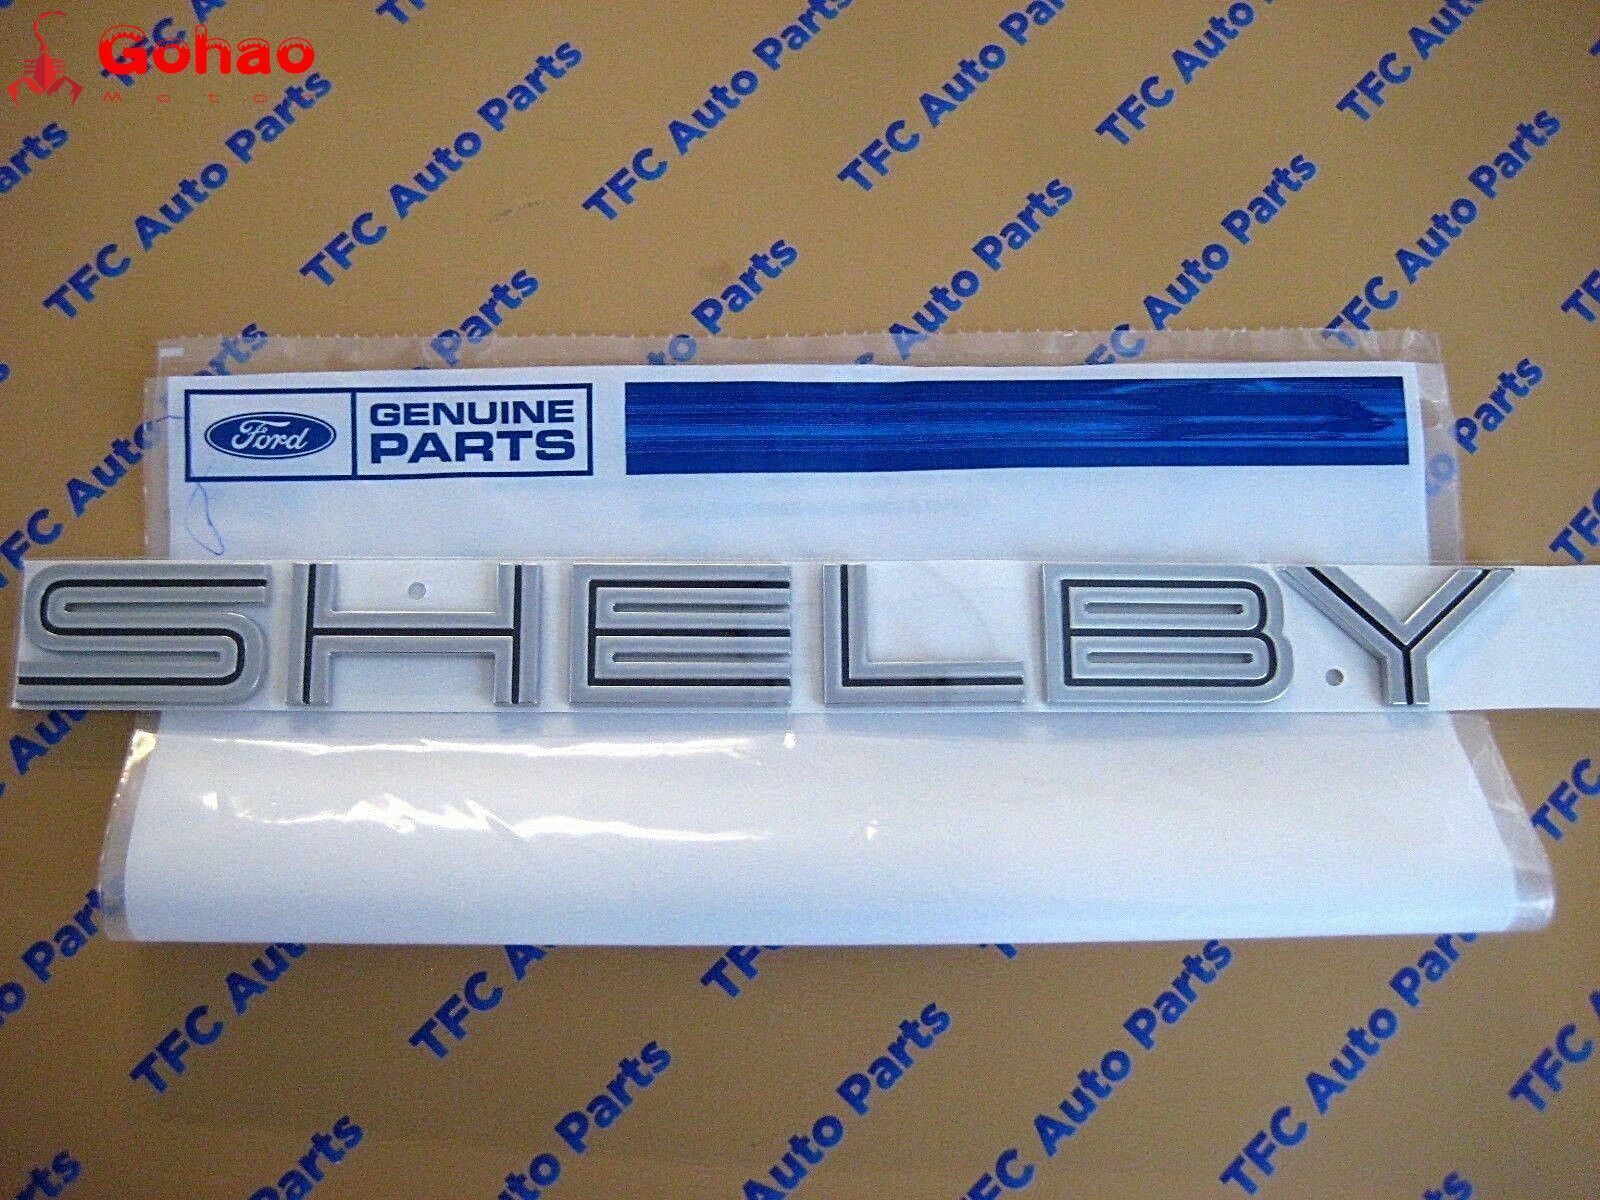 2007-UP Shelby GT500 Car Rear Emblem Nameplate Badge Decal Sticker New